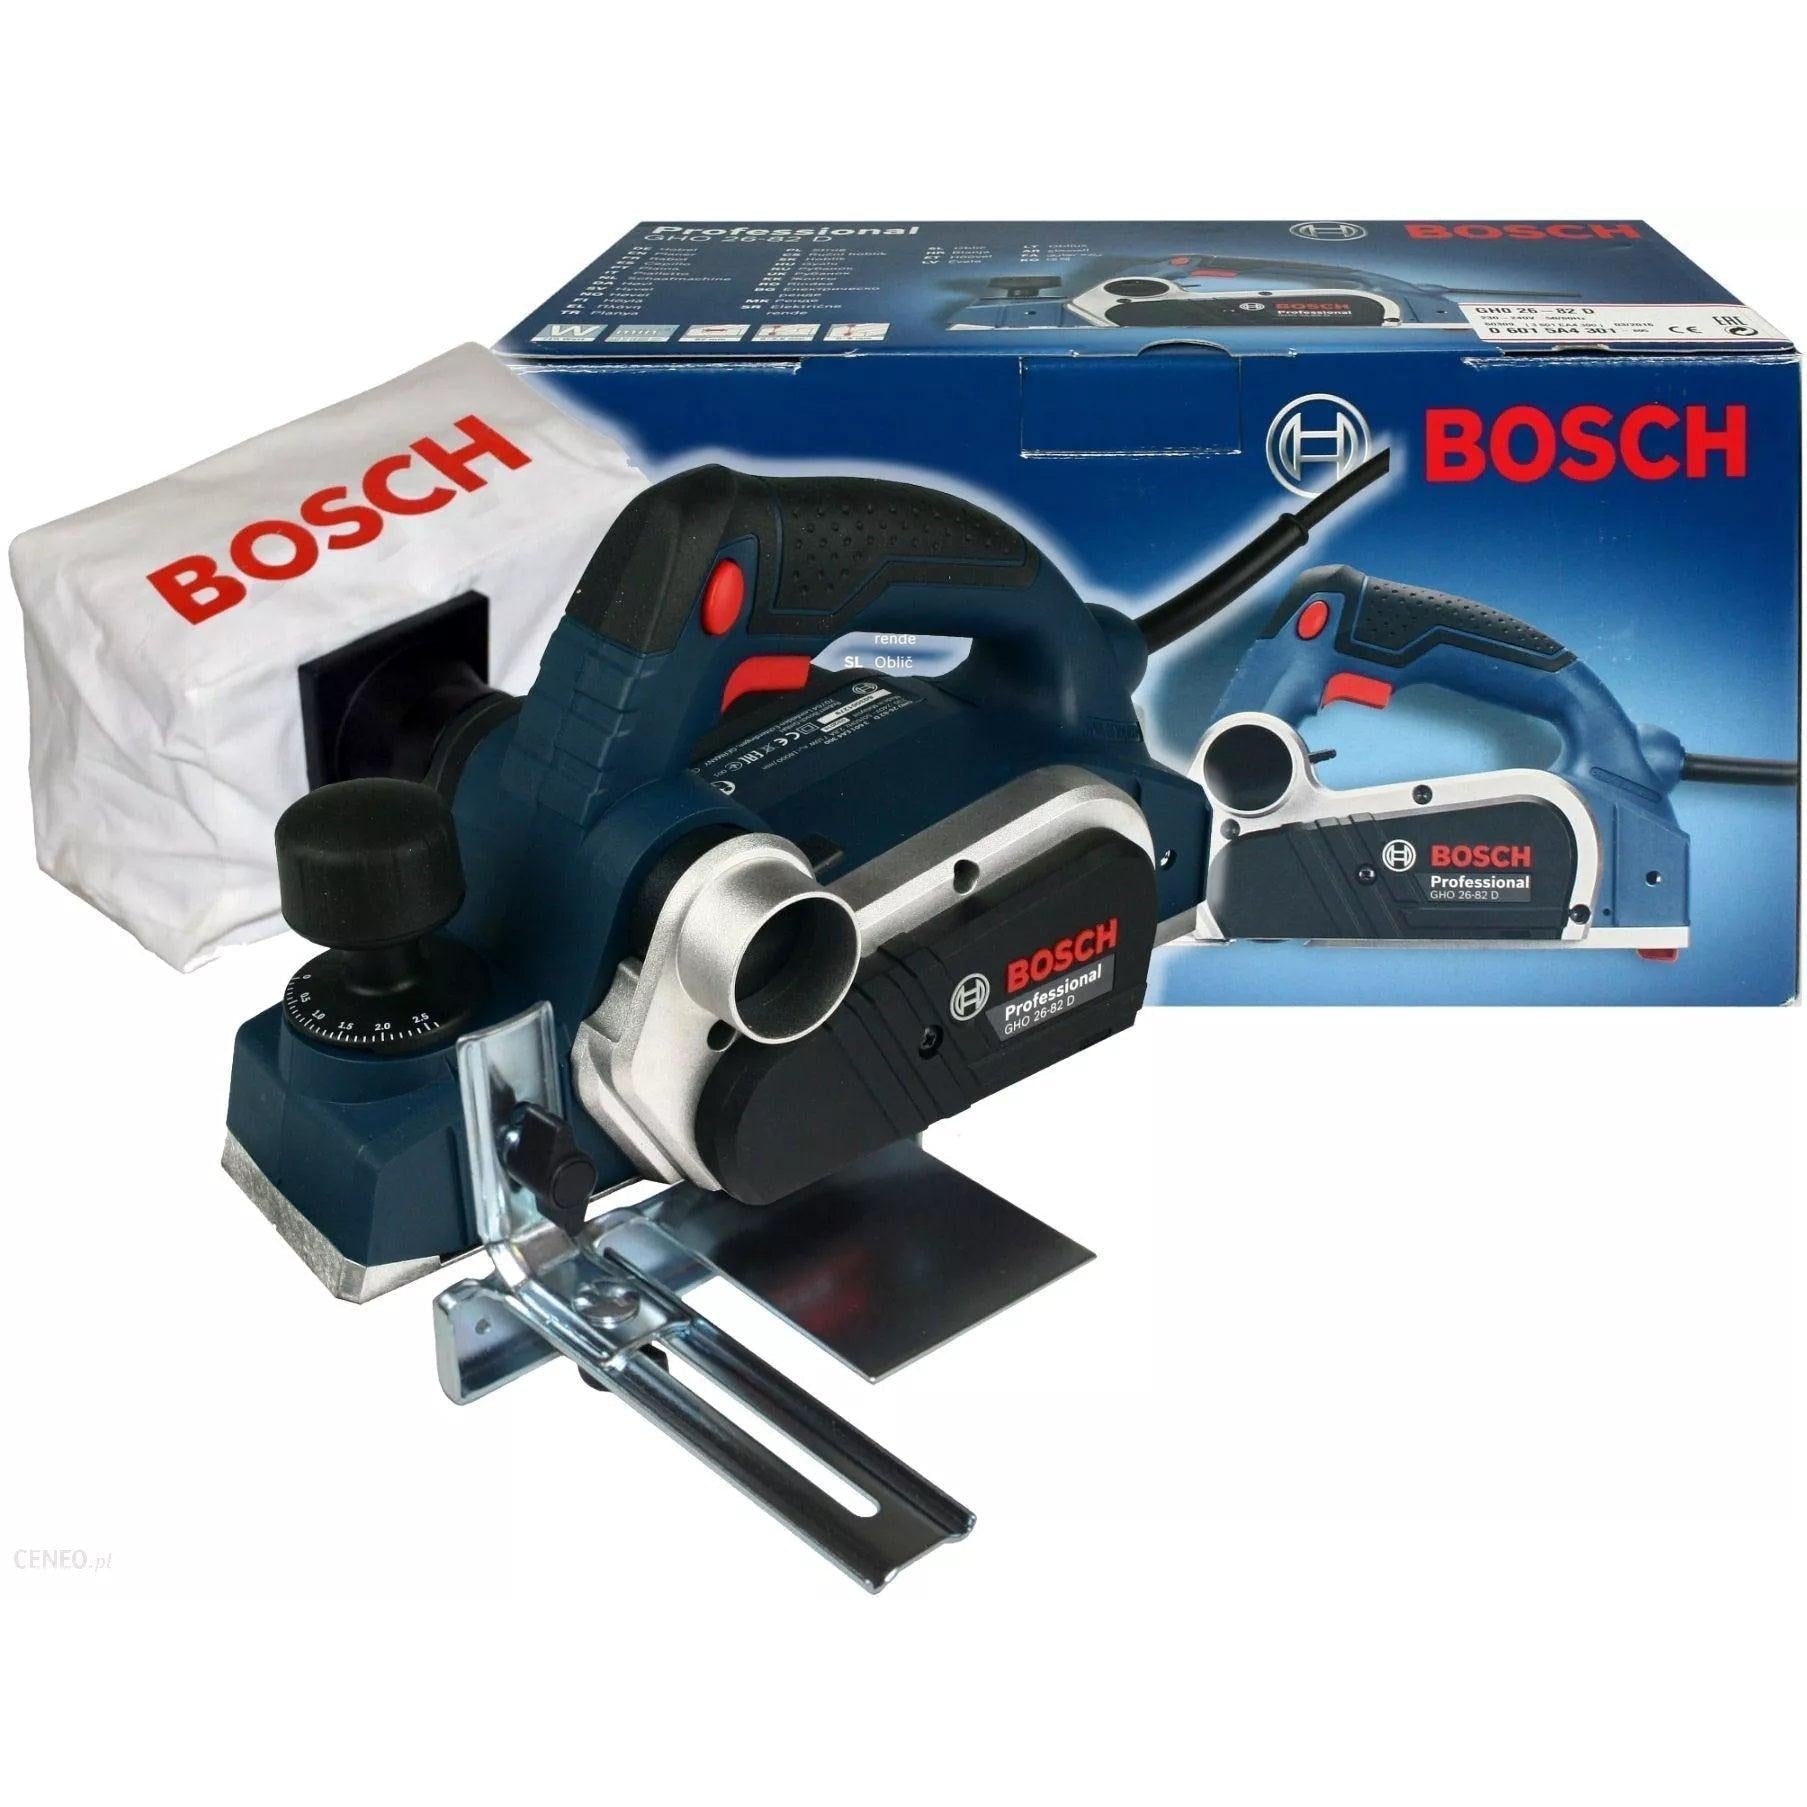 Bosch Professional Planer GHO 26-82 D 06015A4301 Power Tool Services